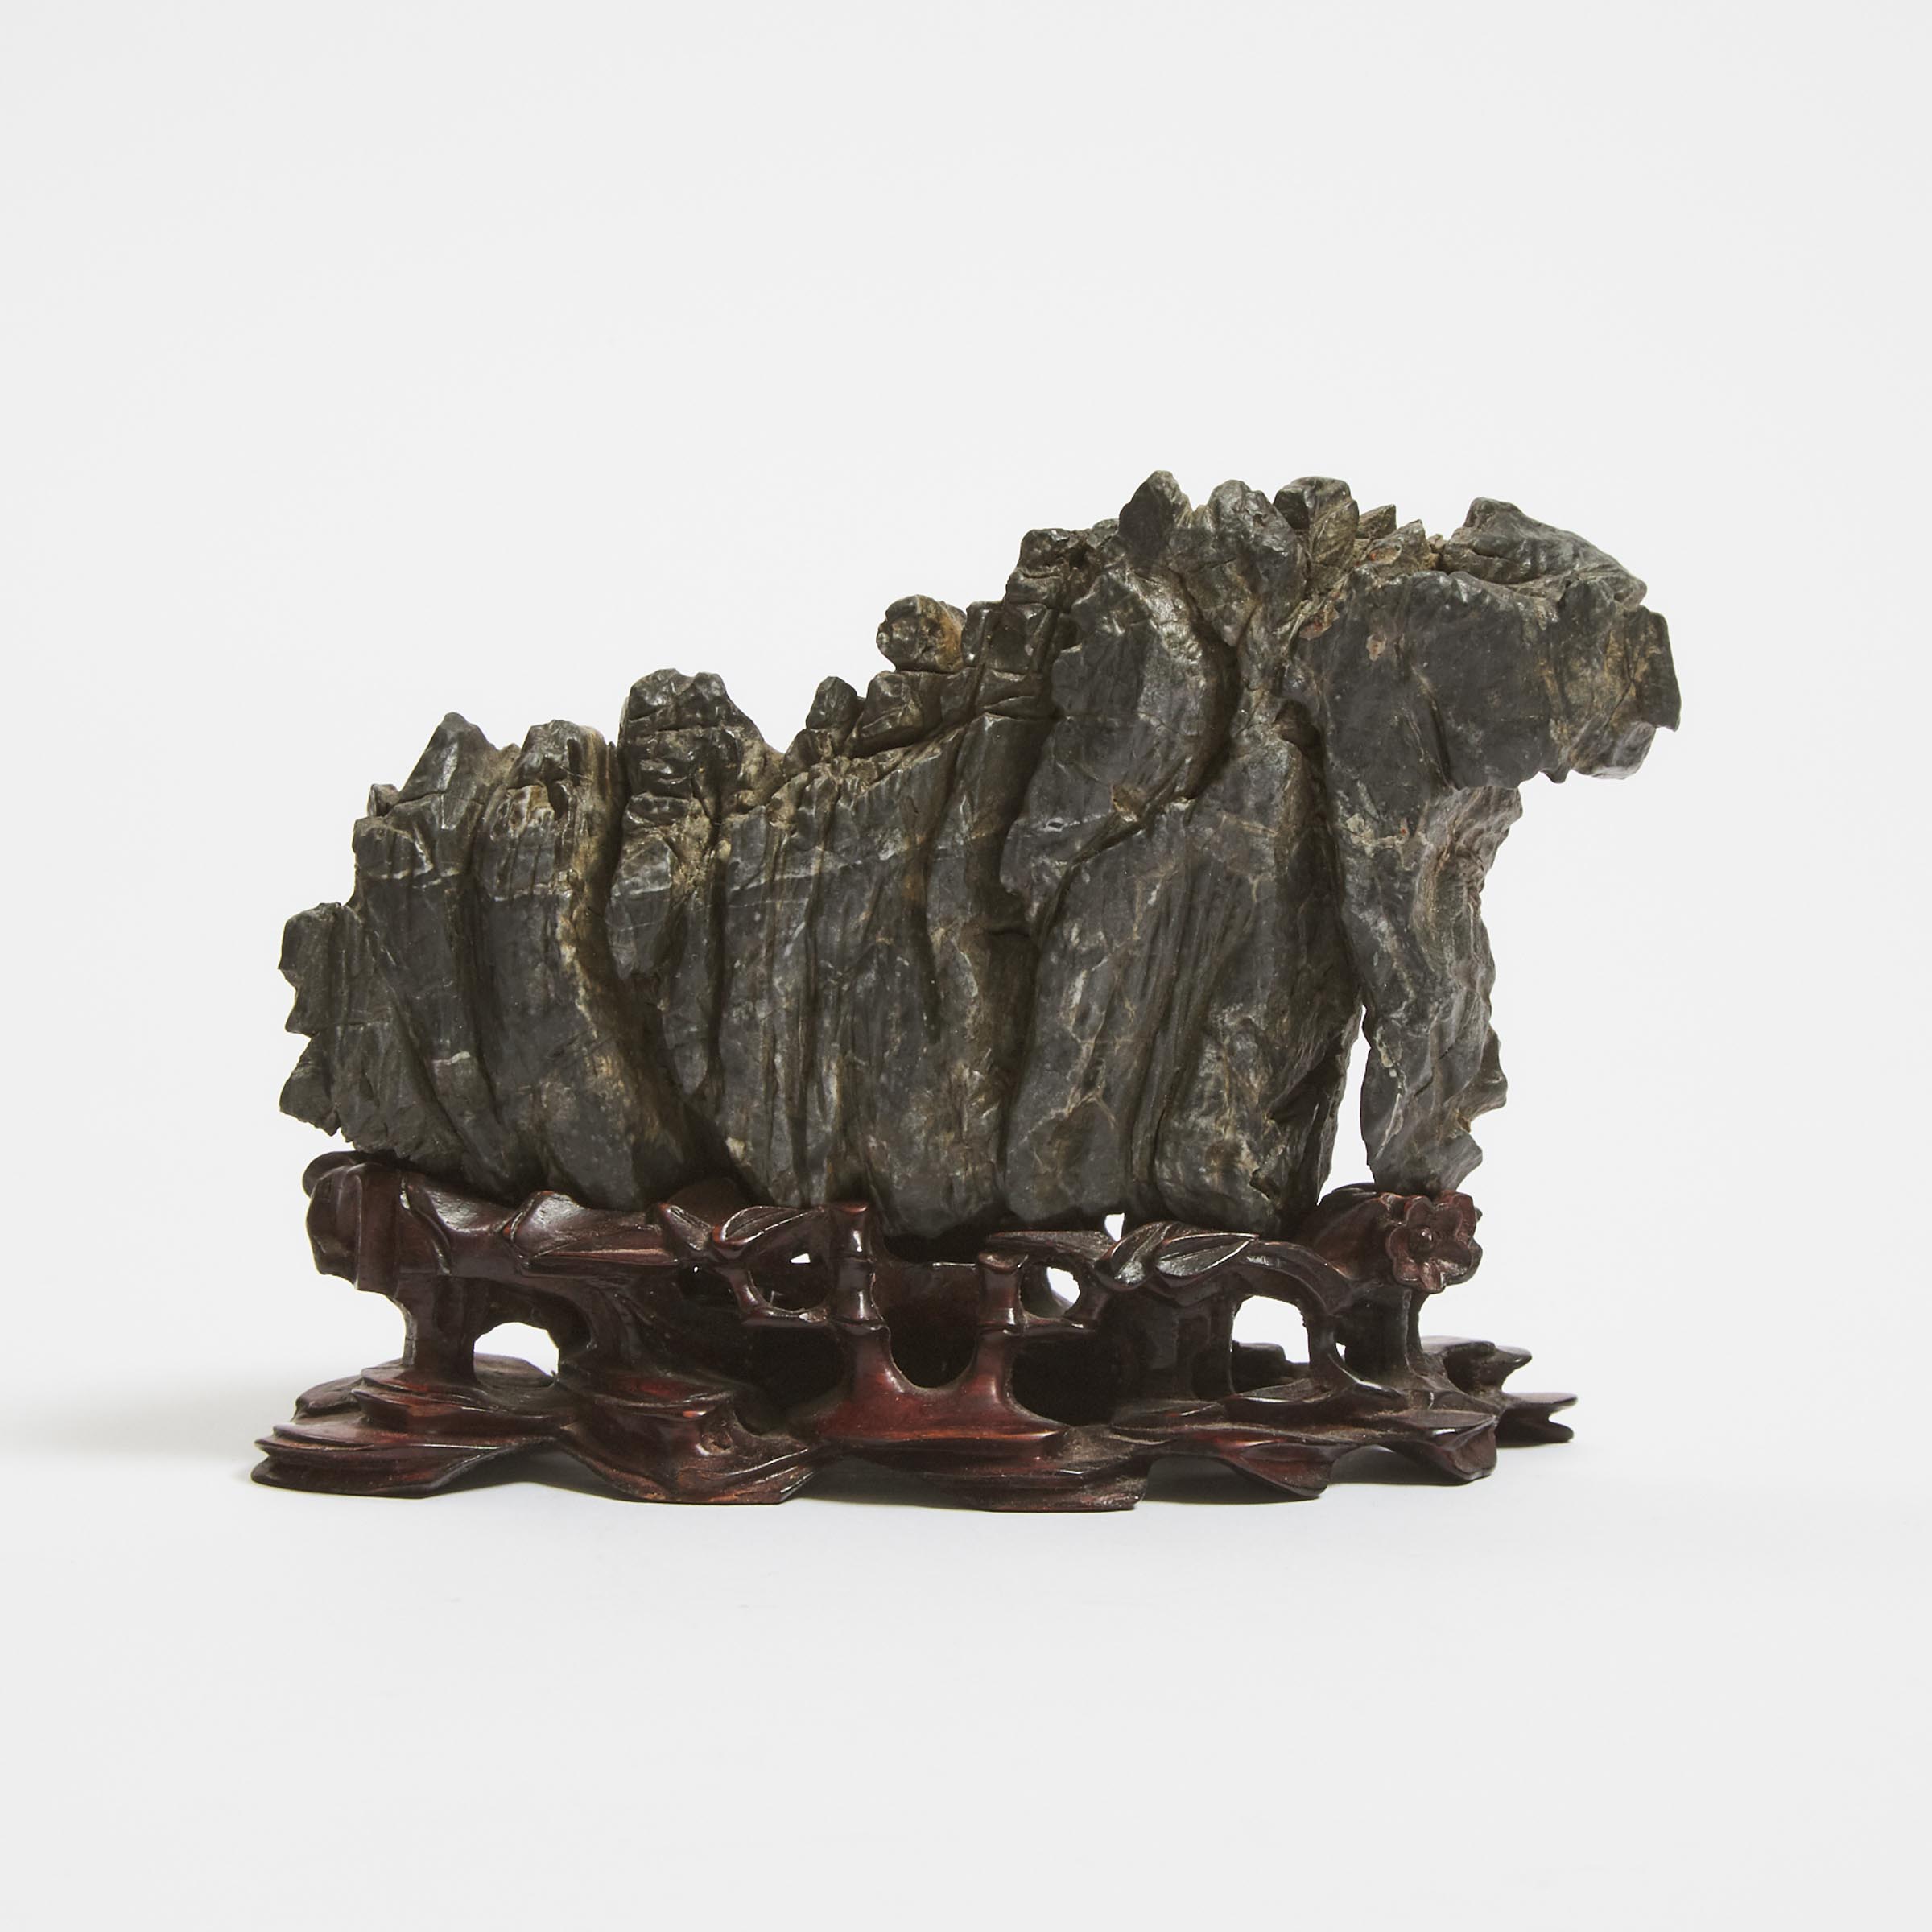 A Miniature Chinese Lingbi Scholar's Rock on a Carved Hardwood Stand